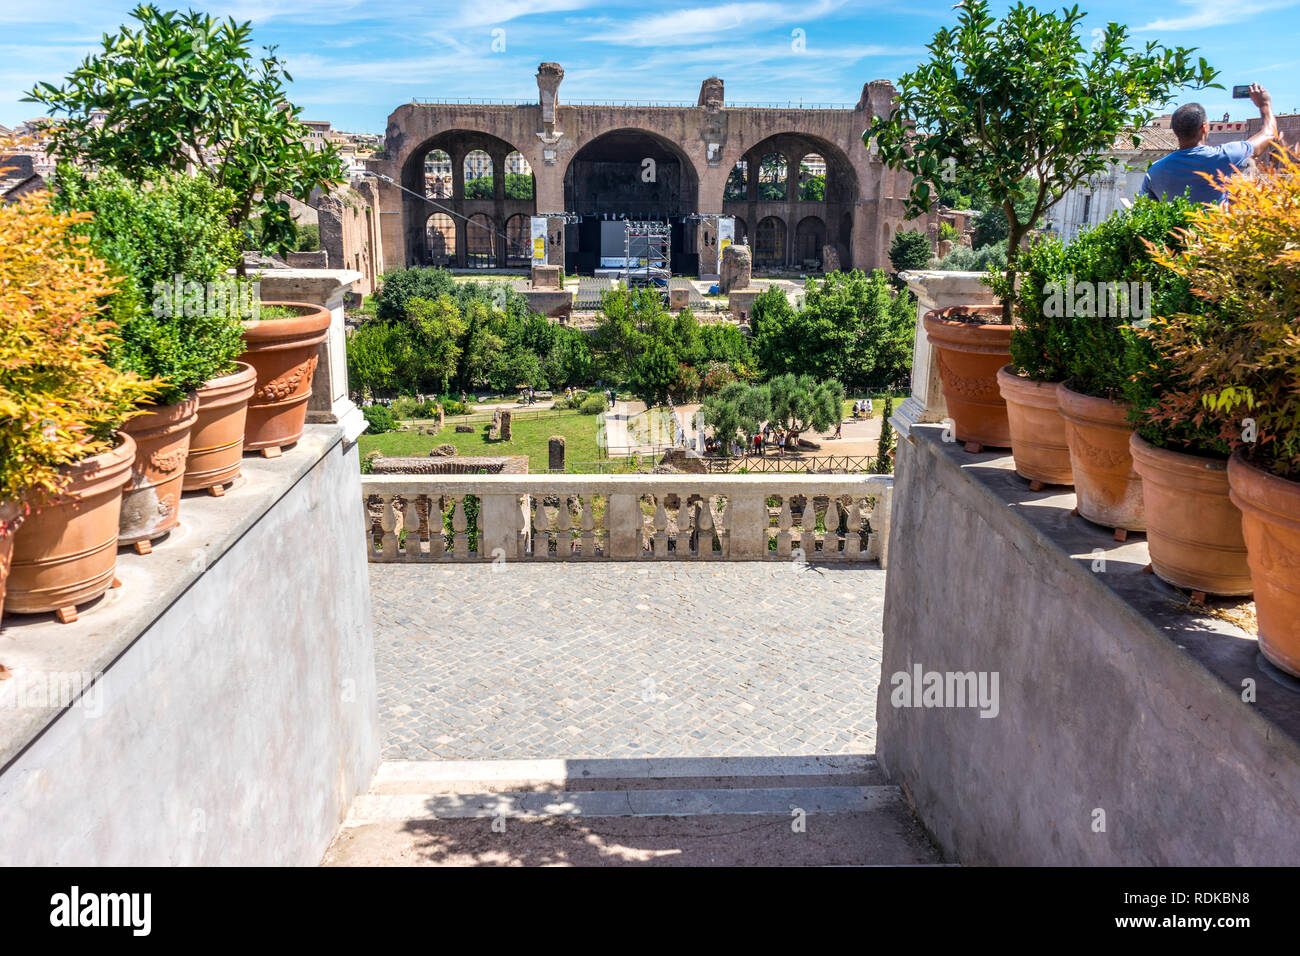 Rome, Italy - 24 June 2018:The ancient ruins of Basilica of Maxentius at Palatine Hills, Roman Forum in Rome Stock Photo